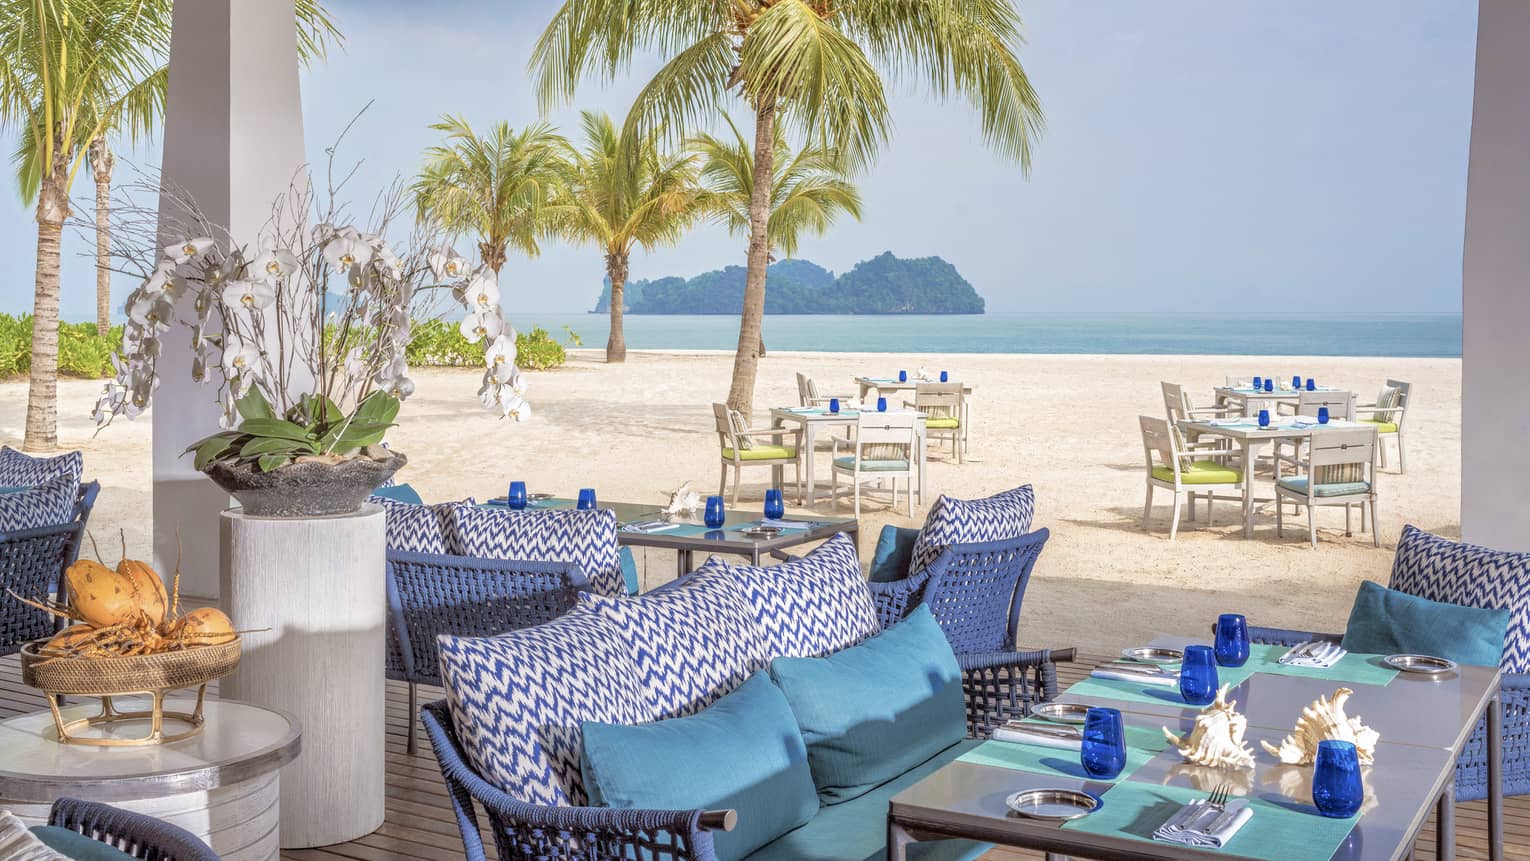 Terrace of ocean-view restaurant, blue cushions on sofa, turquoise place mats and blue glasses on table